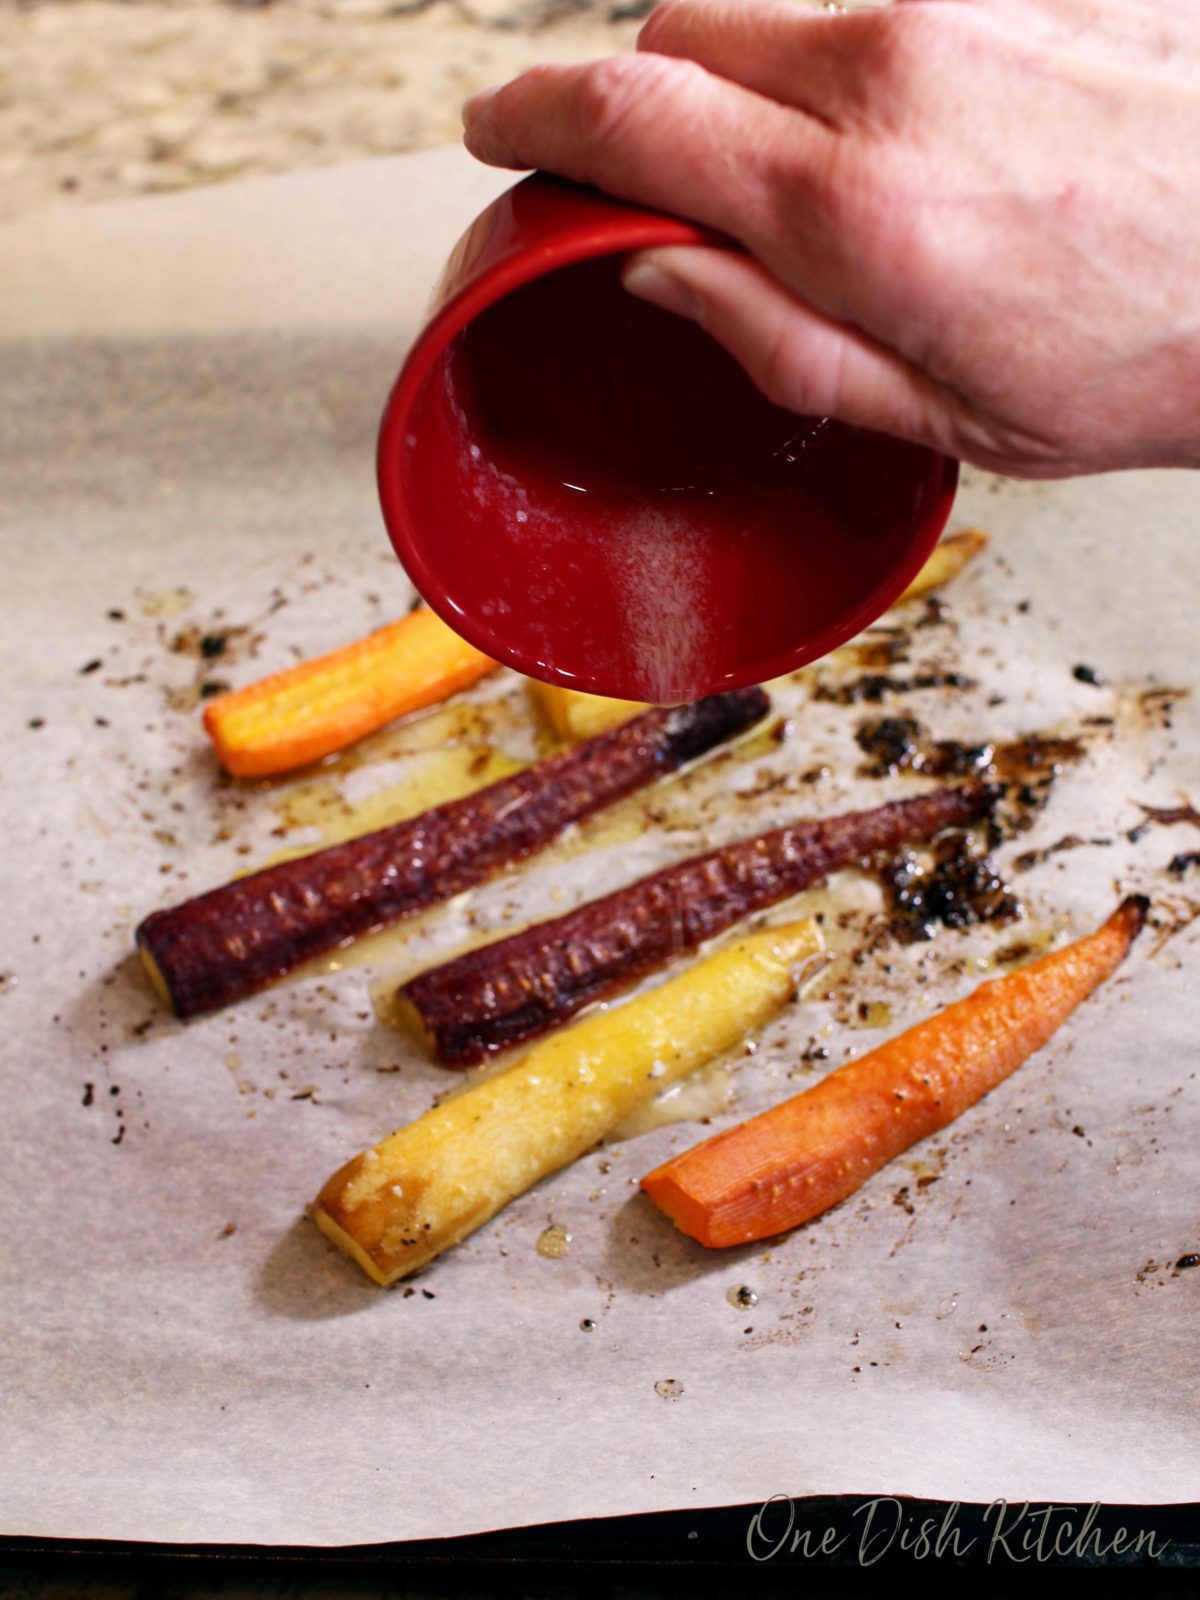 melted butter in a small red bowl being poured over baked carrots.